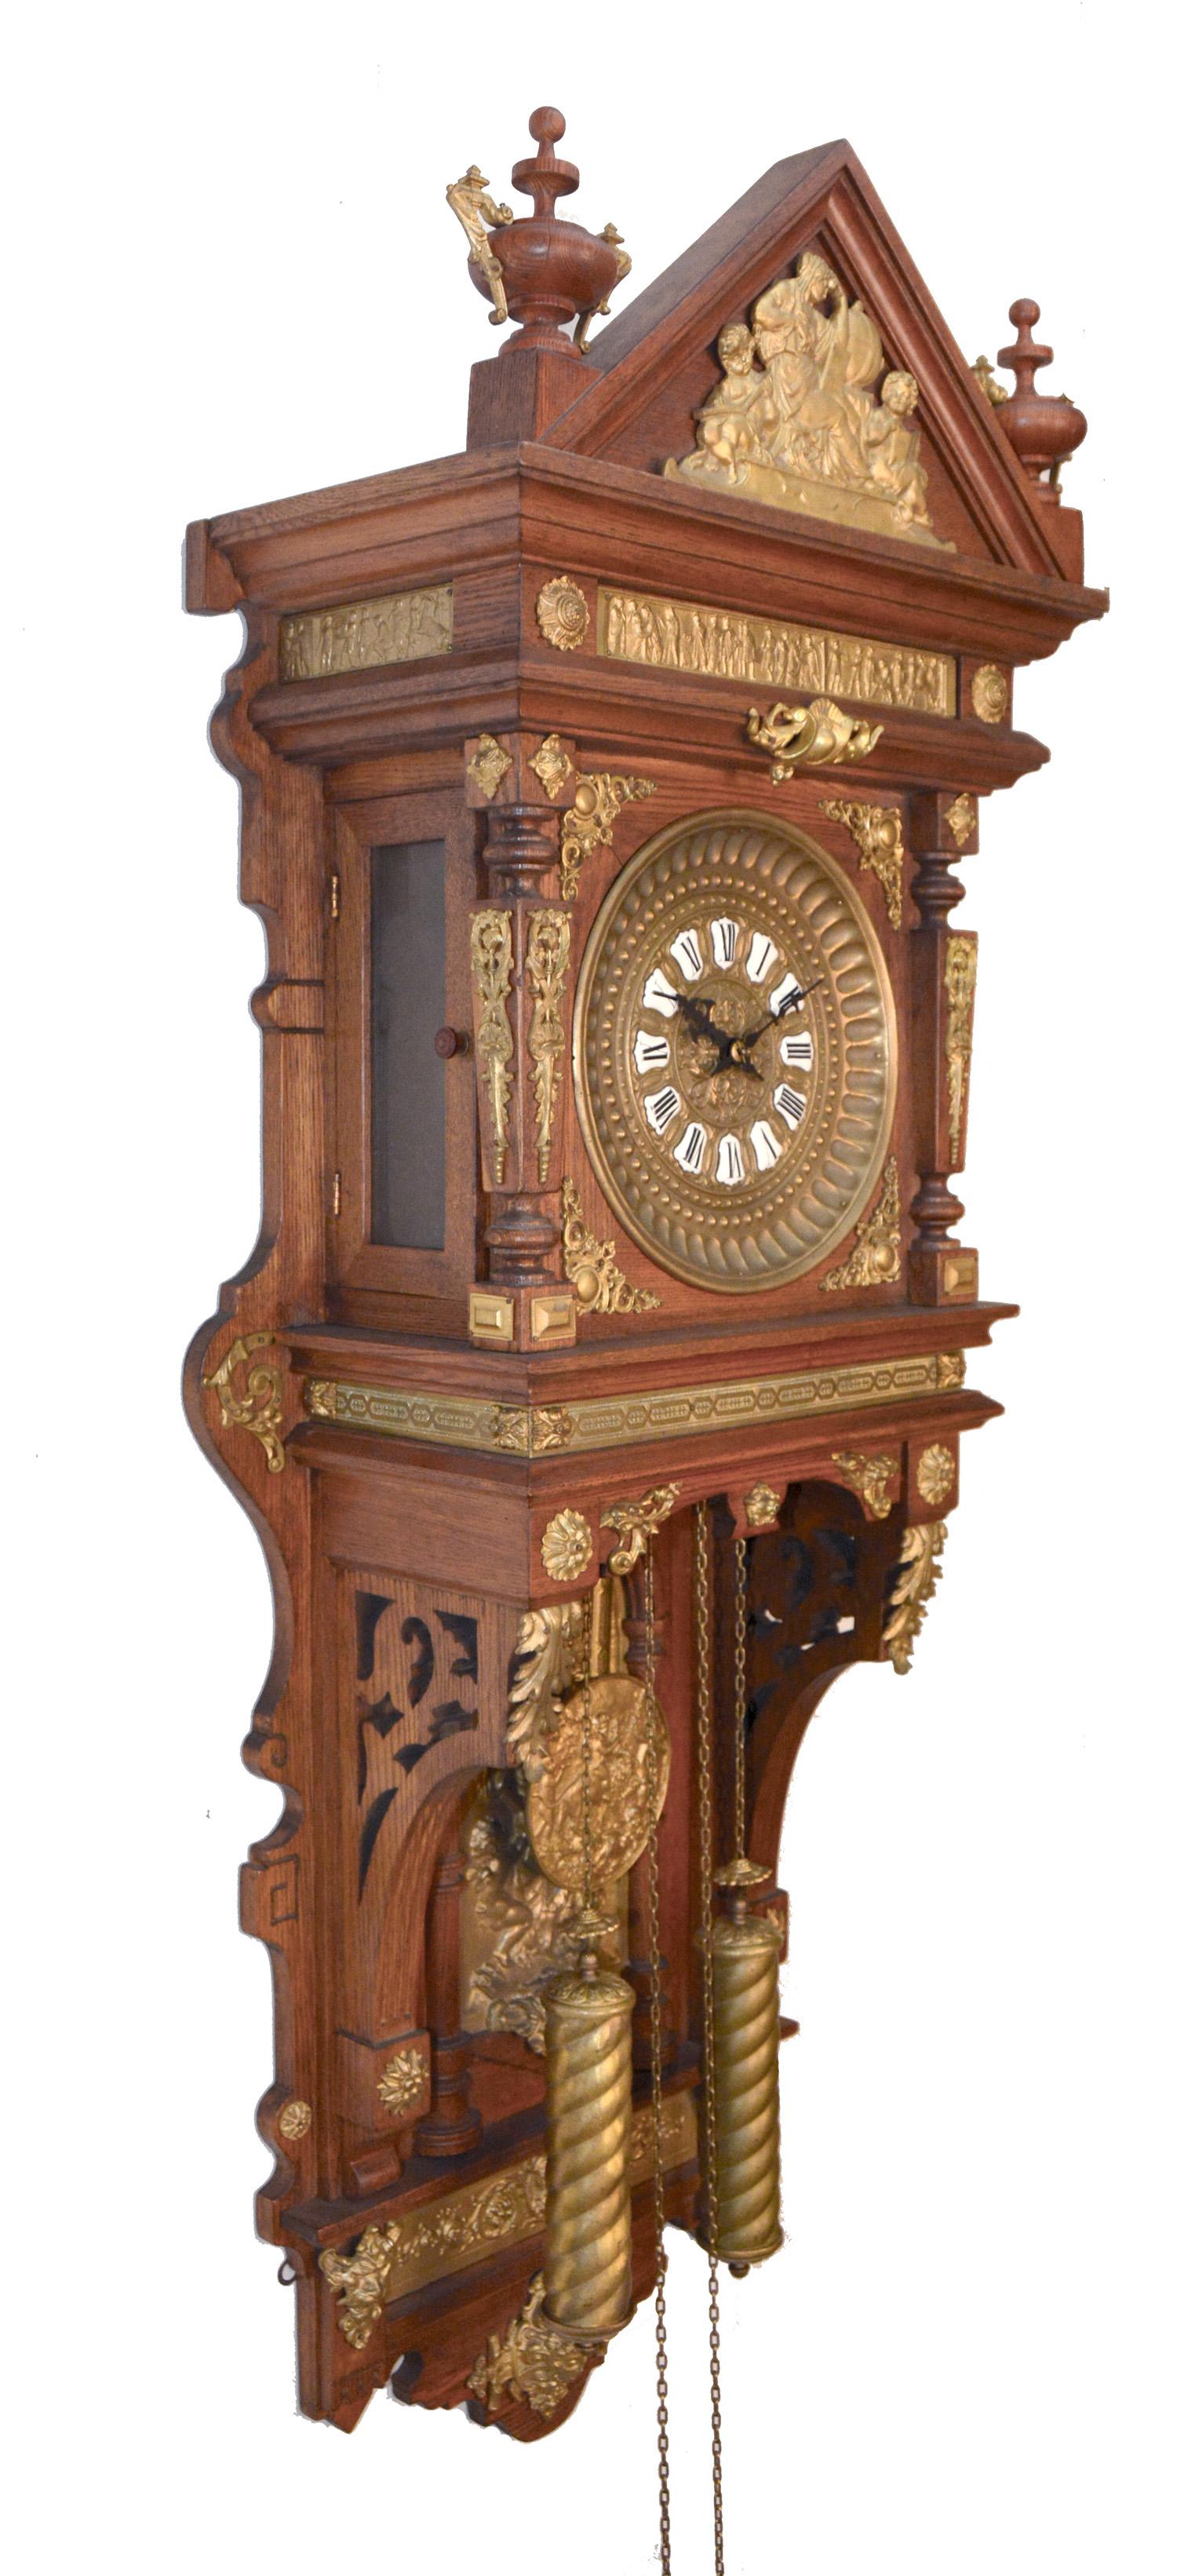 Here is an 'Antique Hanging' model double weight wall clock. The entire clock case and the finials are made of solid oak. The all solid brass casting decoration on the whole clock body is just breath taking. The time shows on 12 individual porcelain